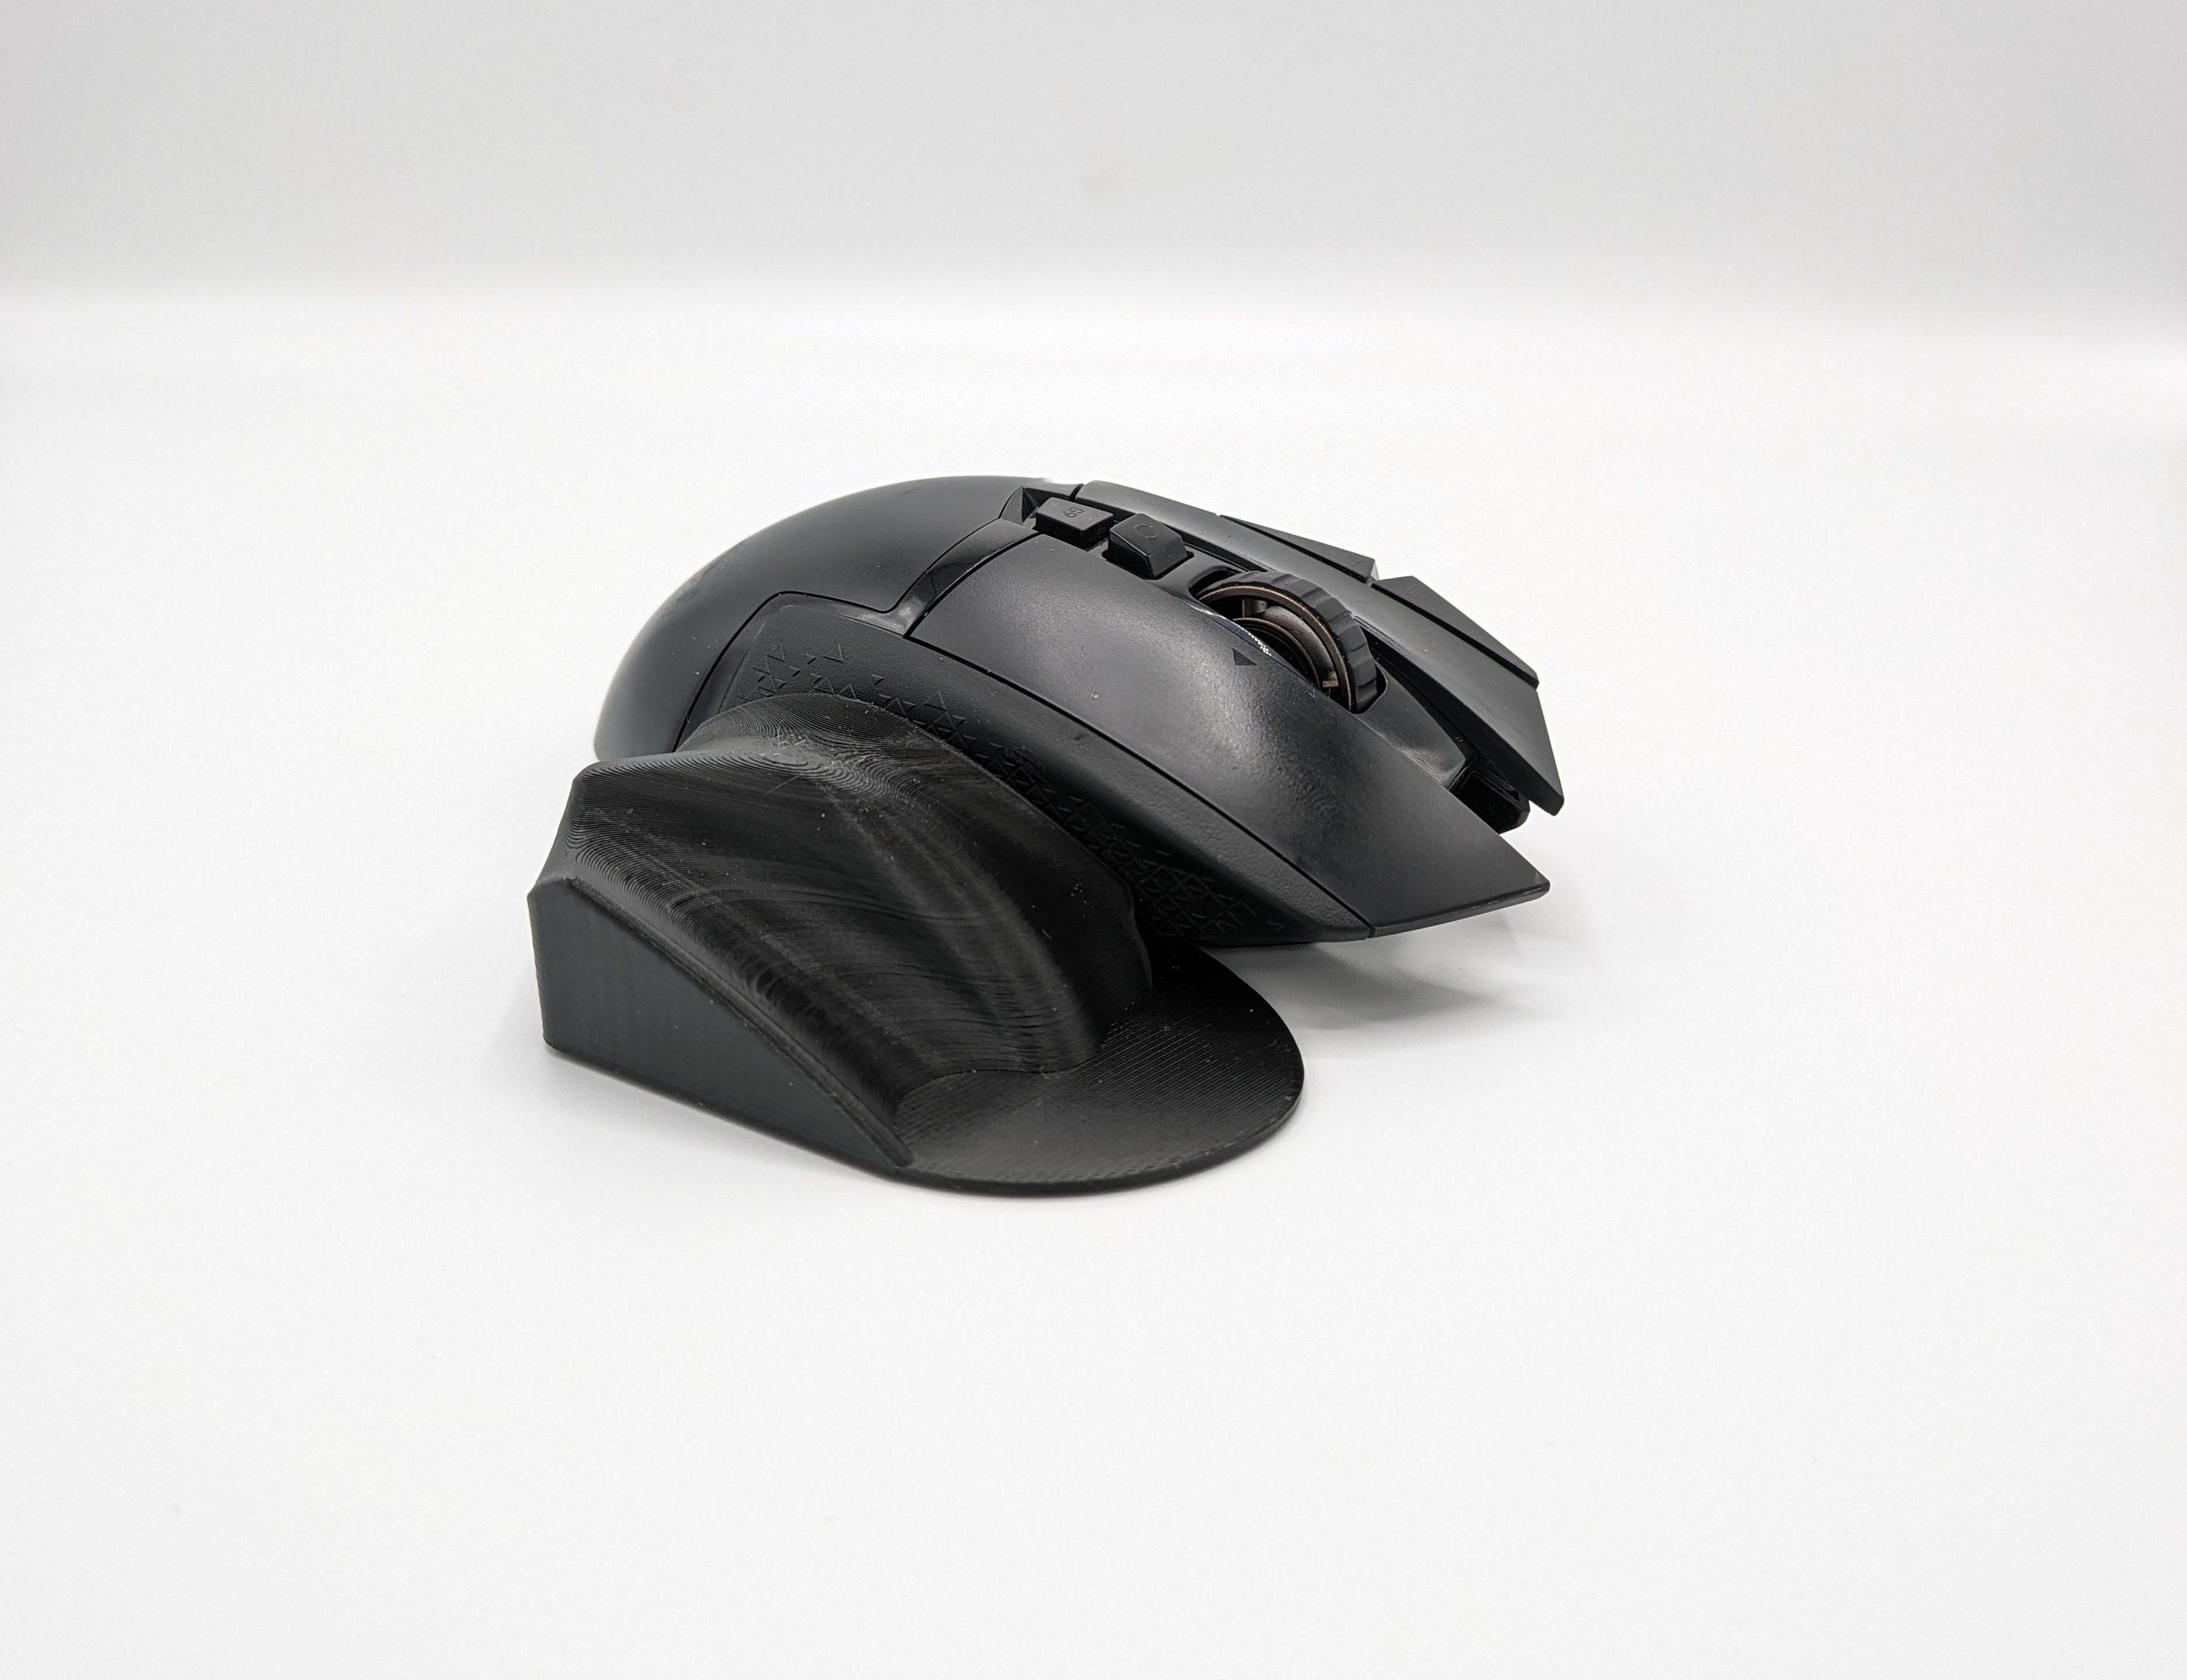 Pinky-rest for my G502 Hero : r/G502MasterRace